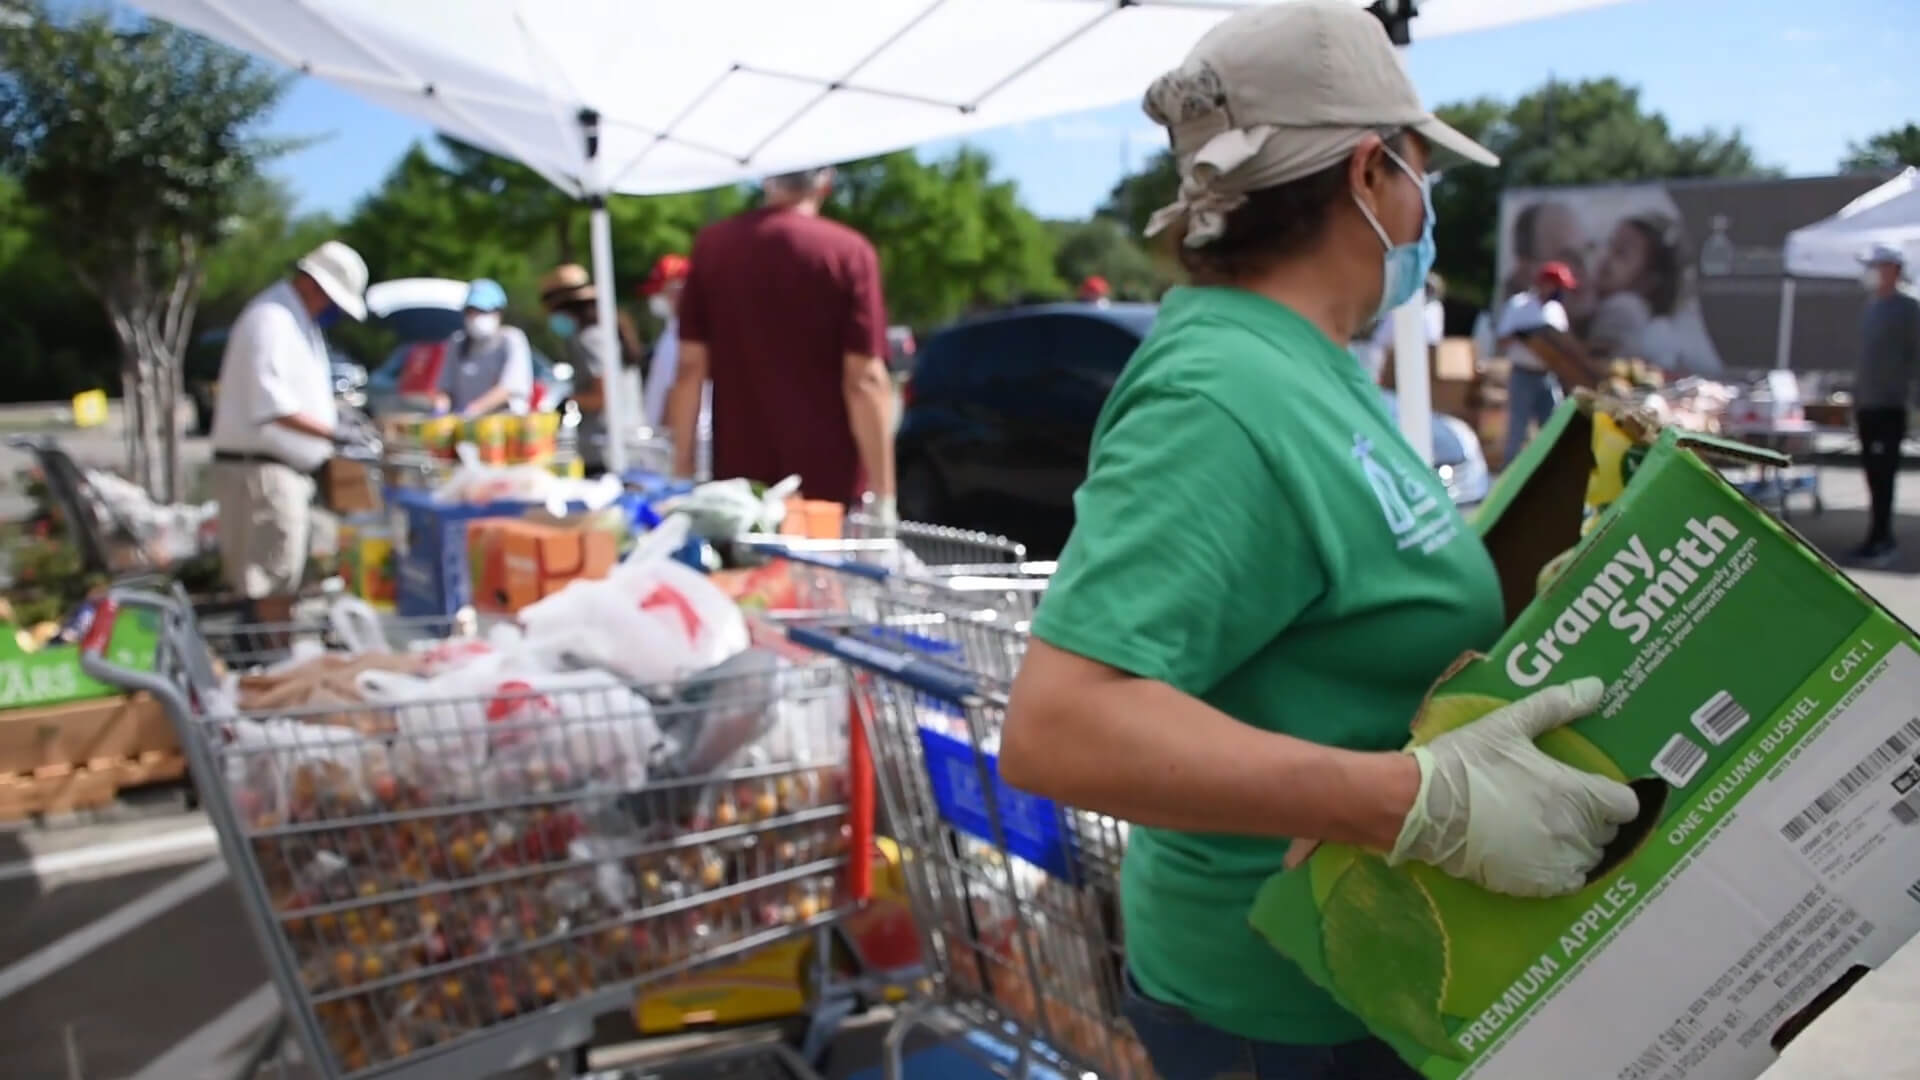 A volunteer helps at Catholic Charities' Mamie George Community Center food distribution.